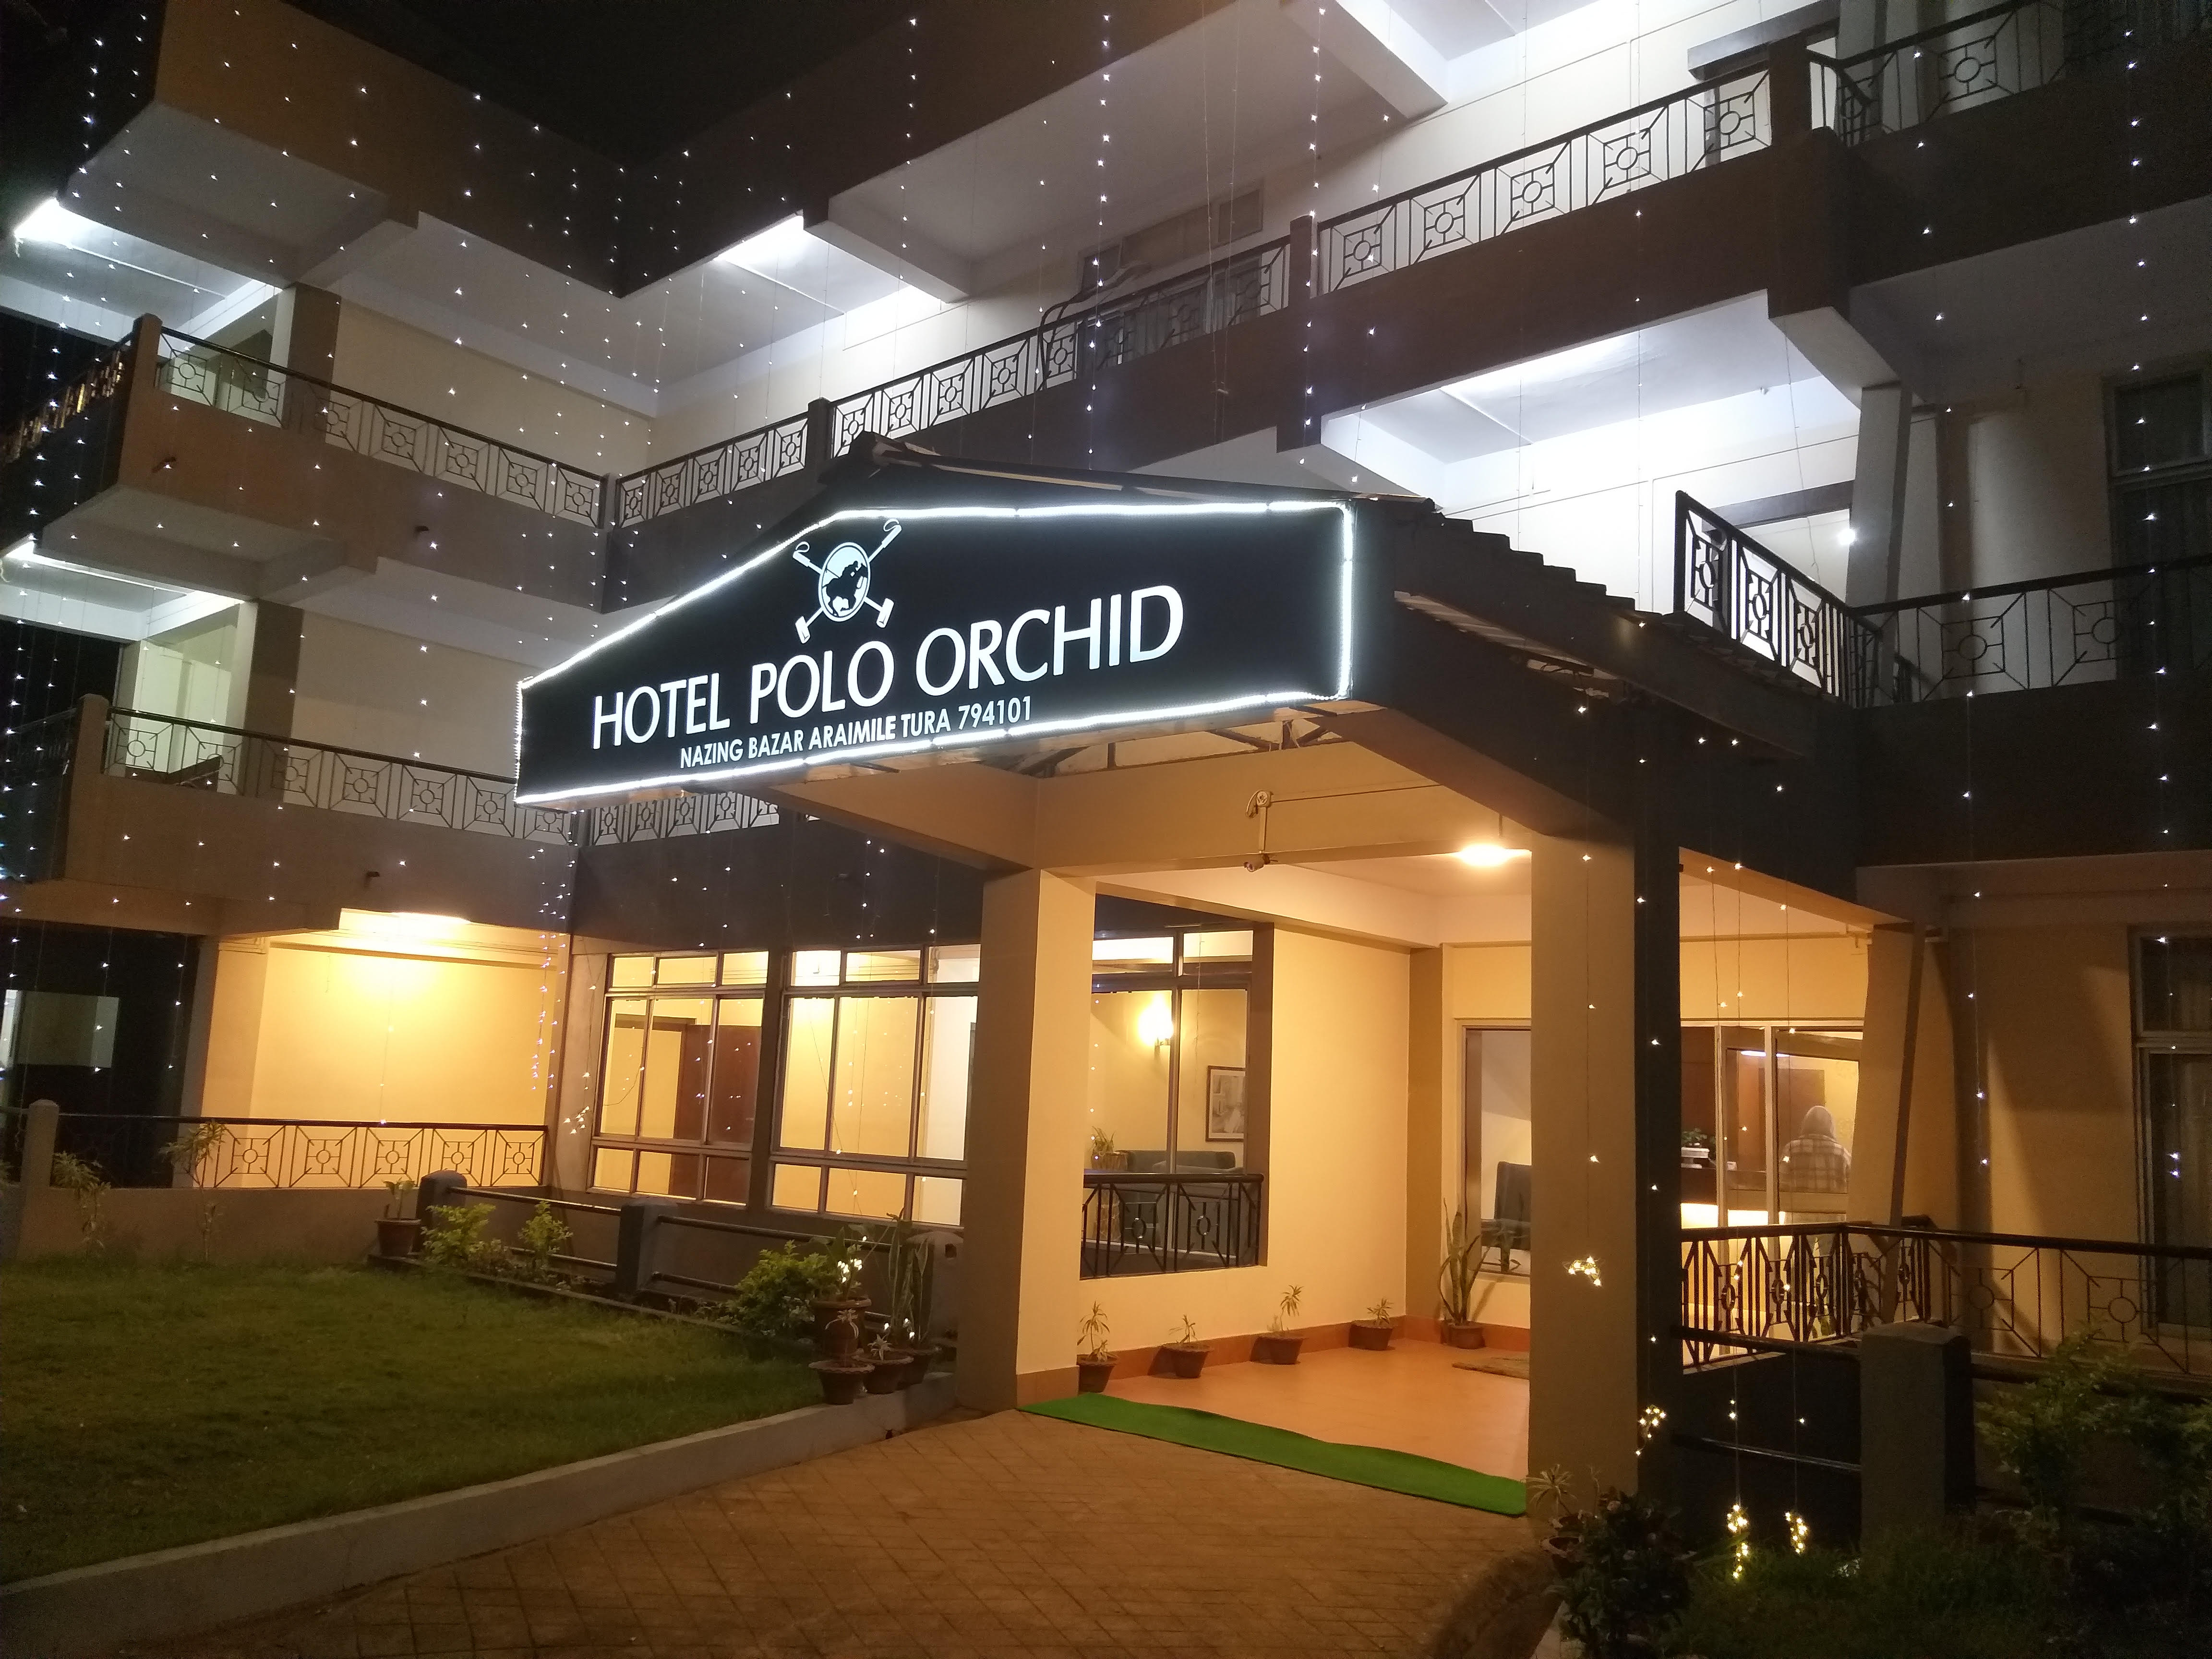 Hotel Polo Orchid